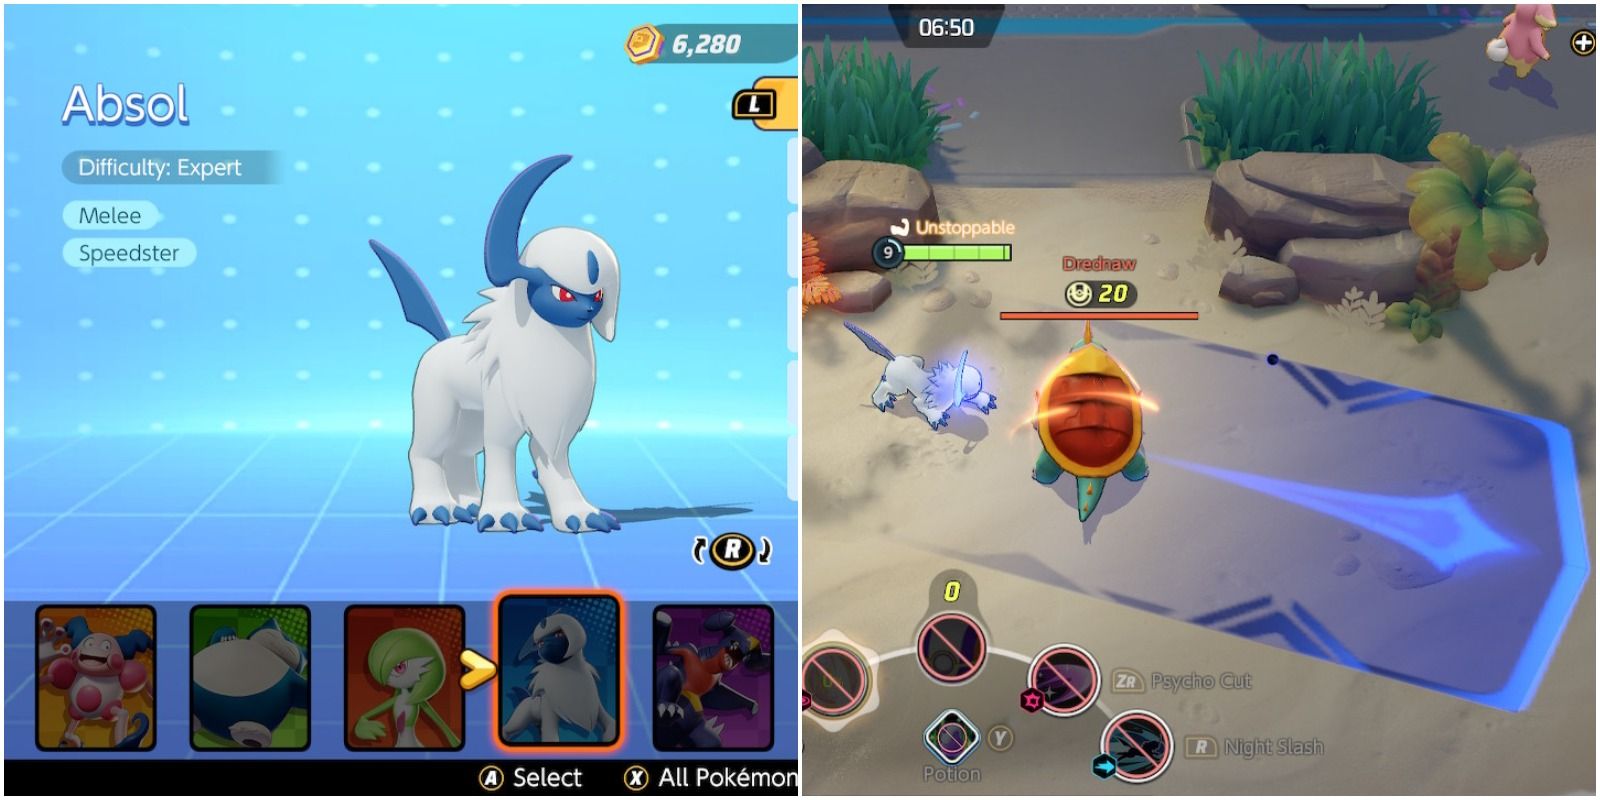 absol in blue menu screen and using its unite move against a wild pokemon.